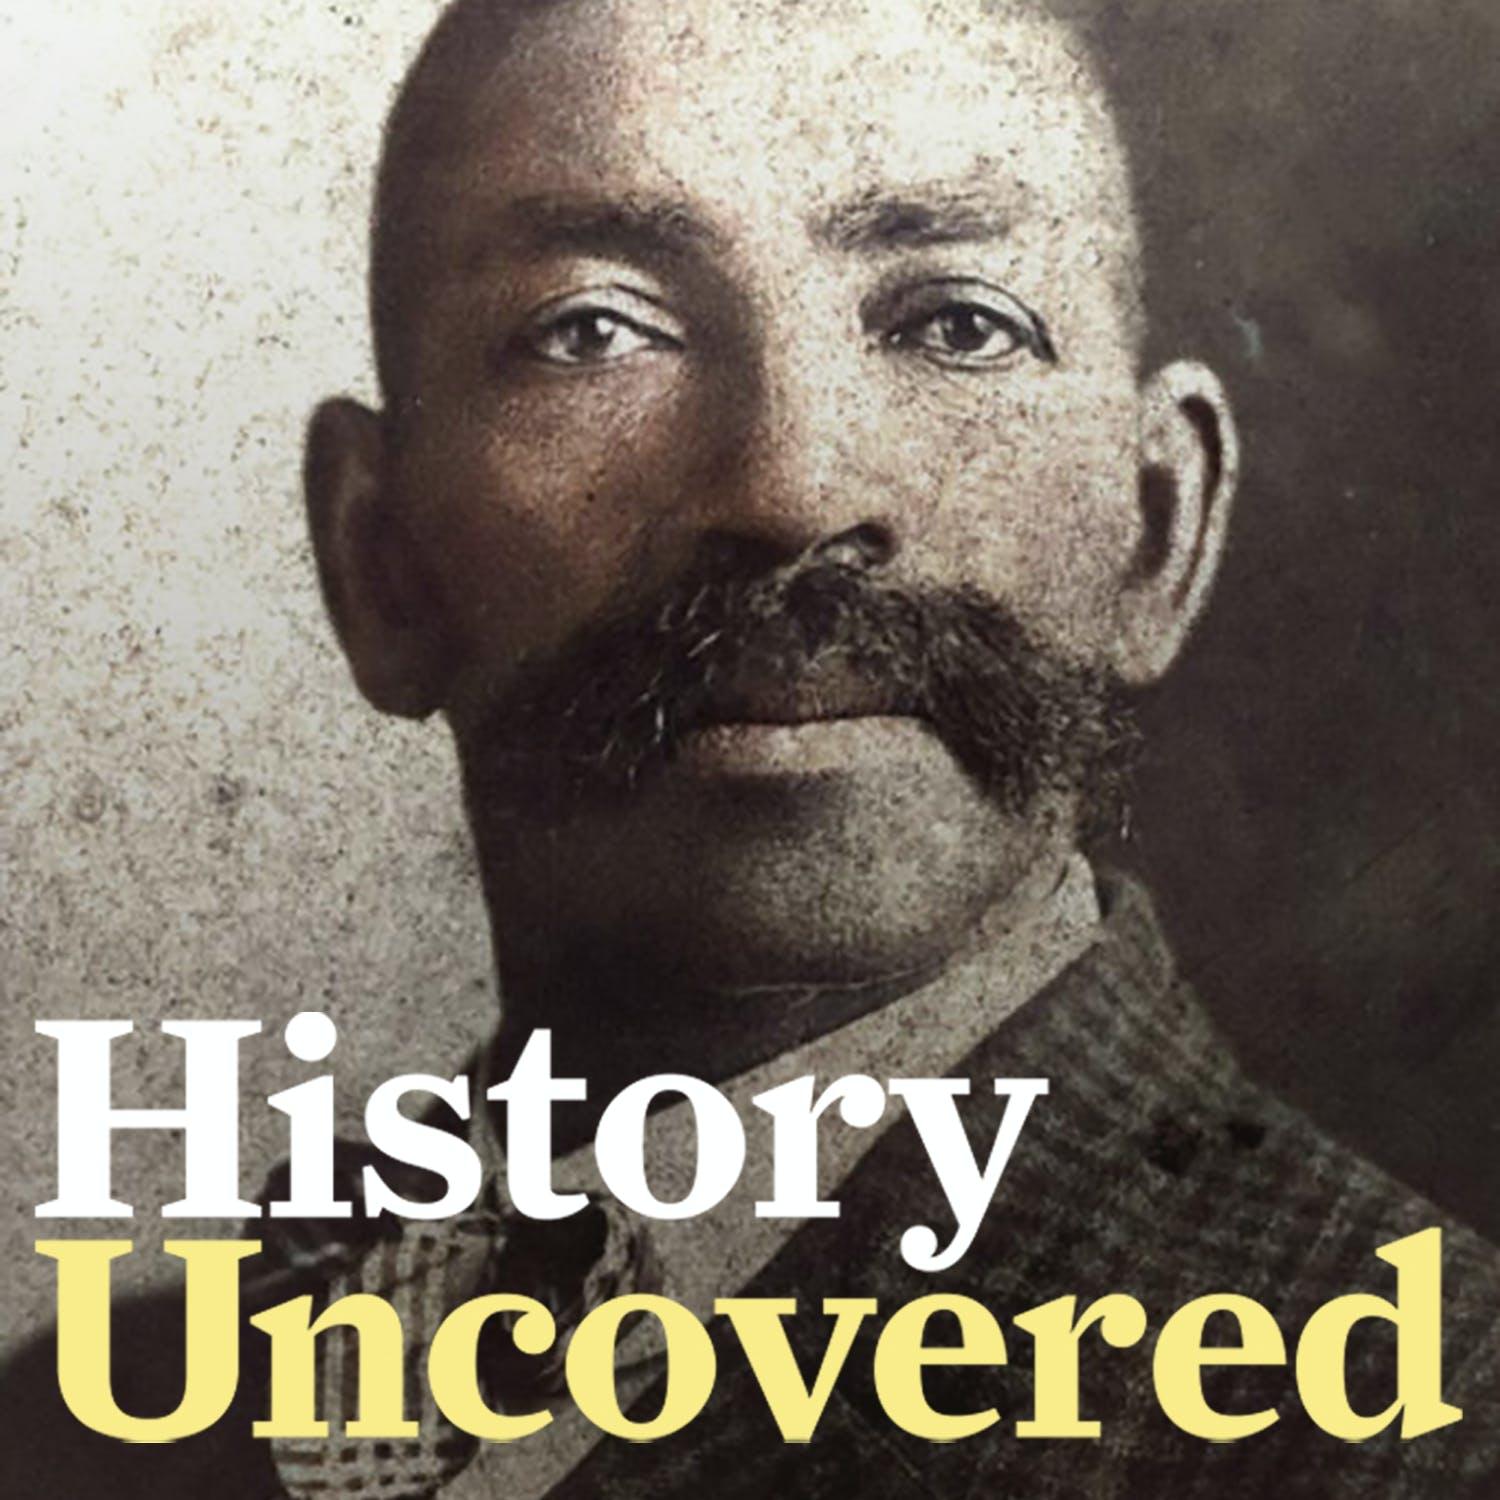 Bass Reeves, The Black Lone Ranger Of The Wild West